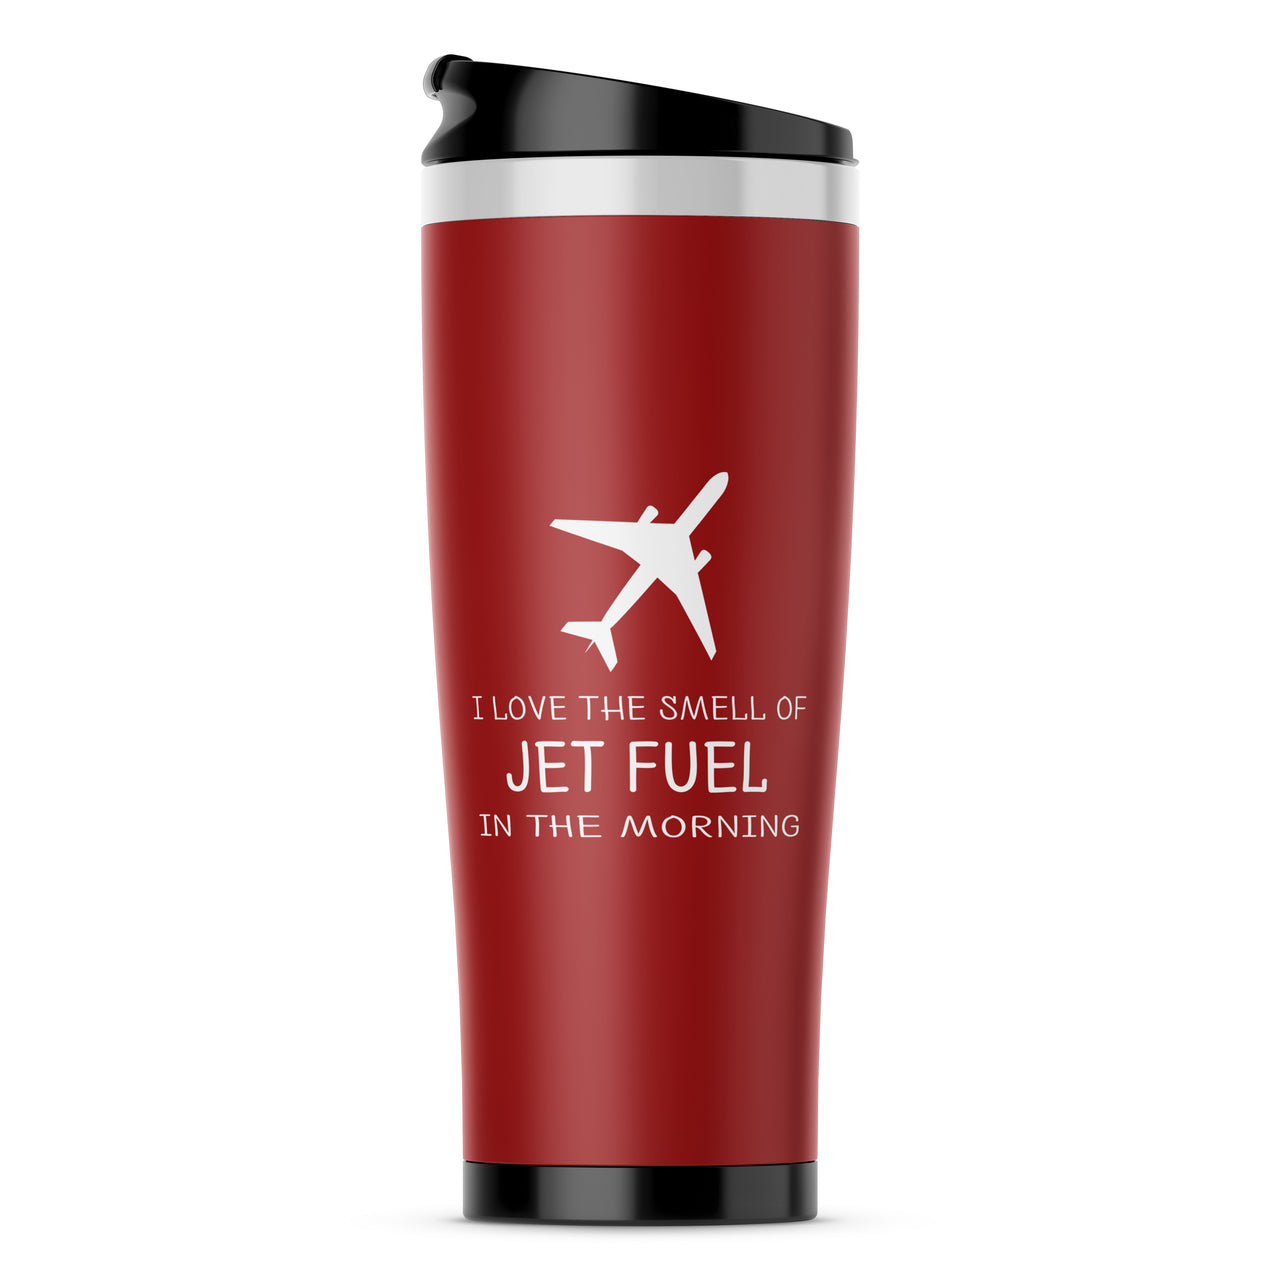 I Love The Smell Of Jet Fuel In The Morning Designed Travel Mugs